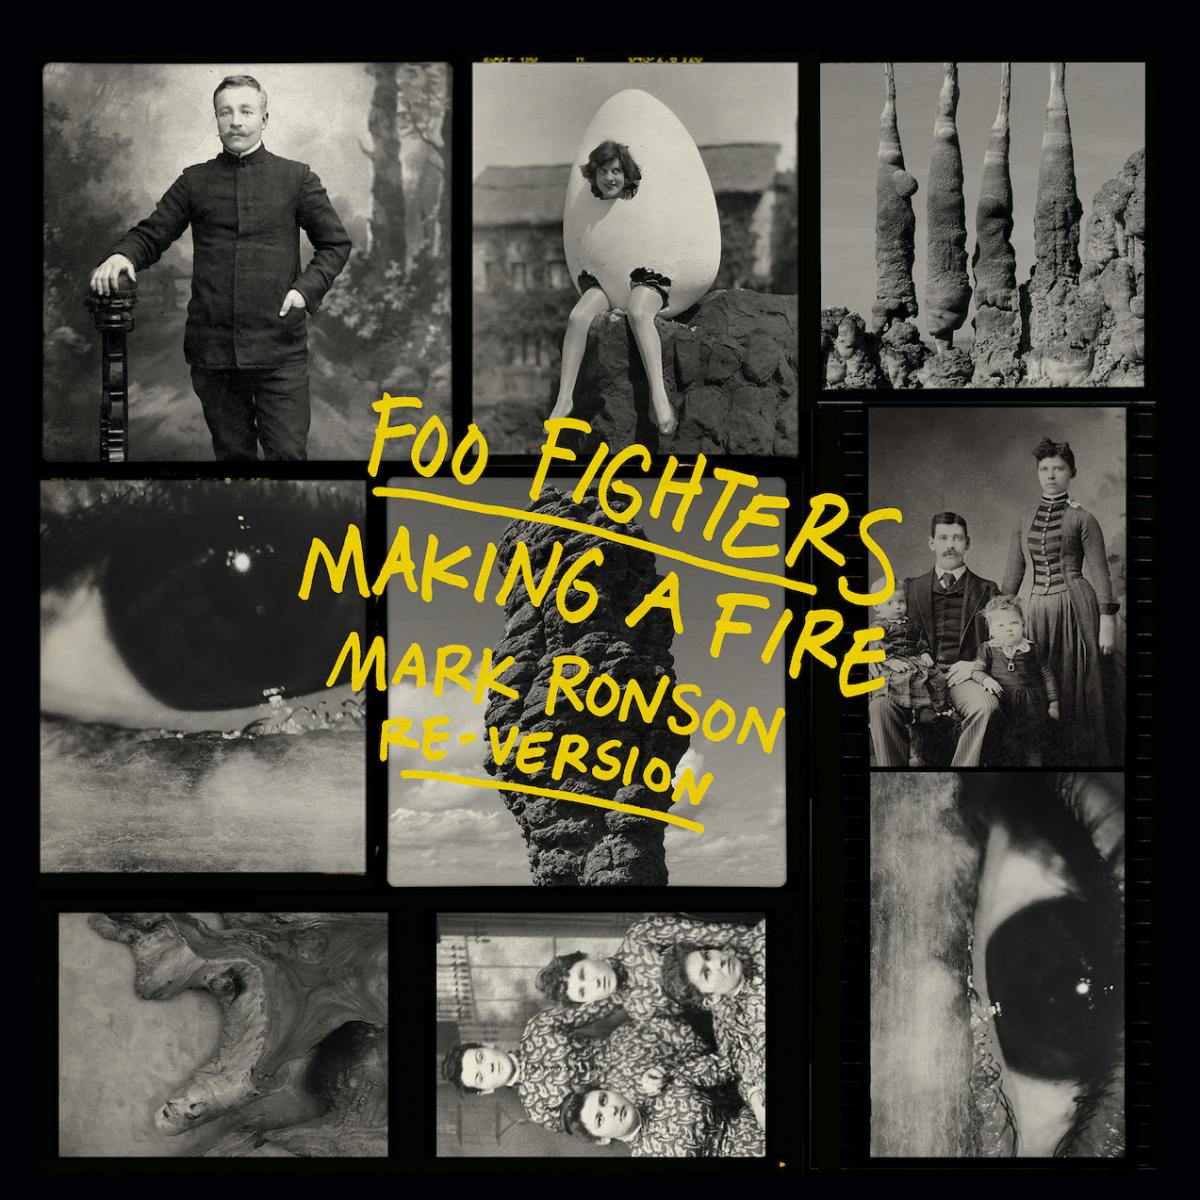 Mark Ronson Re-Version of Foo Fighters 'Making A Fire' Out Now